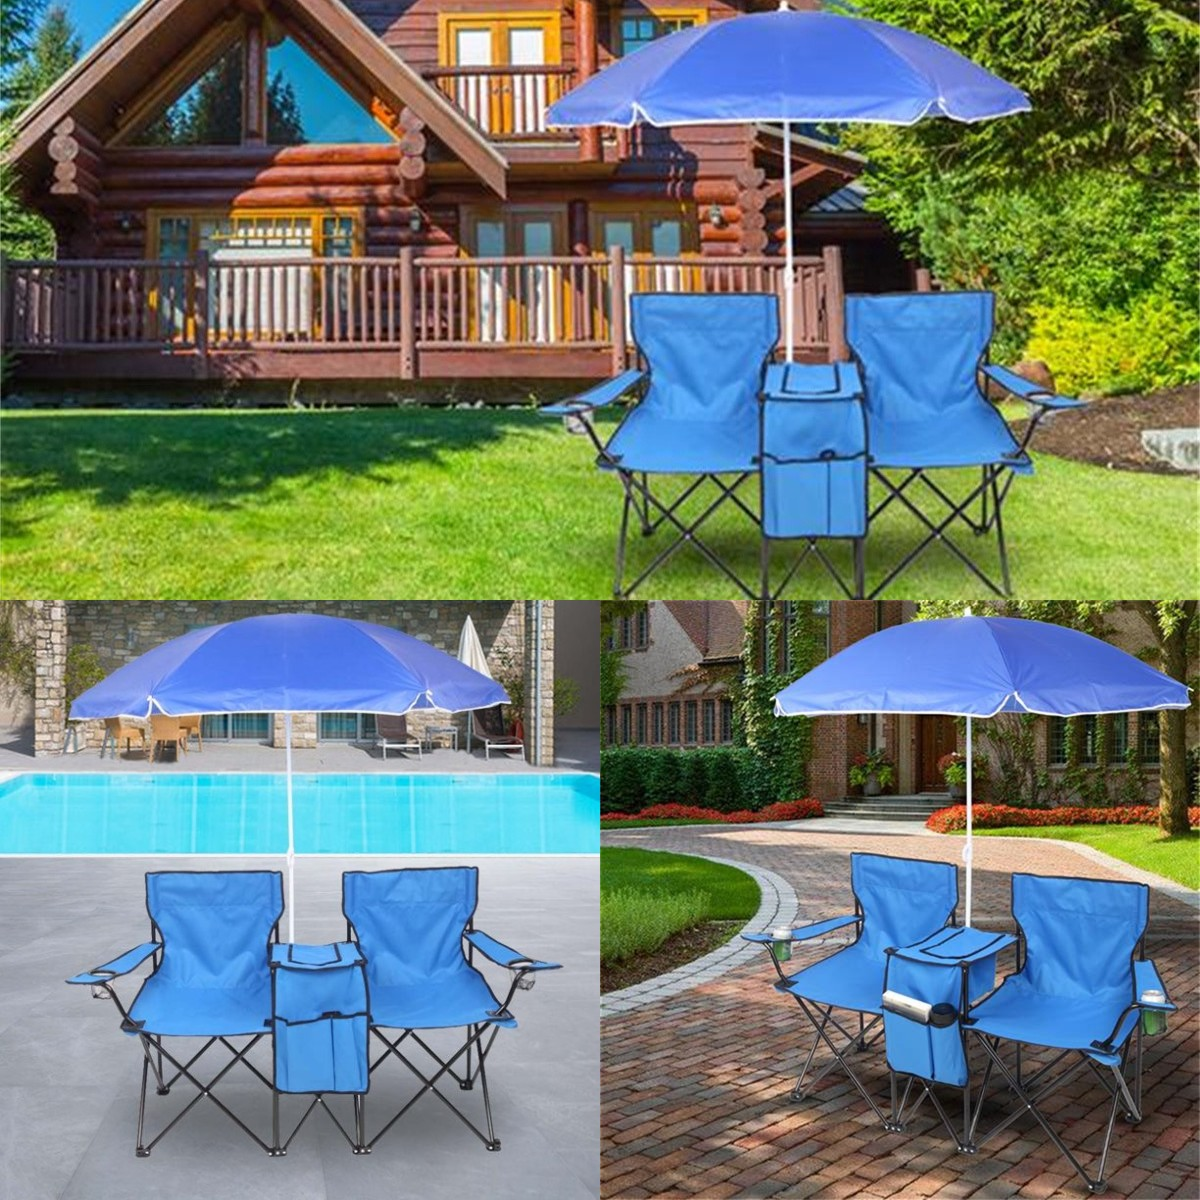 Goorabbit Anti-UV Umbrella Fishing Camp Chair, Outdoor 2-Seat Folding Chairs,  Steel Frame Collapsible Lawn Outdoor Chair w/ Cup Holder Cooler Pouch for  Patio Pool Support 180lbs,Blue 